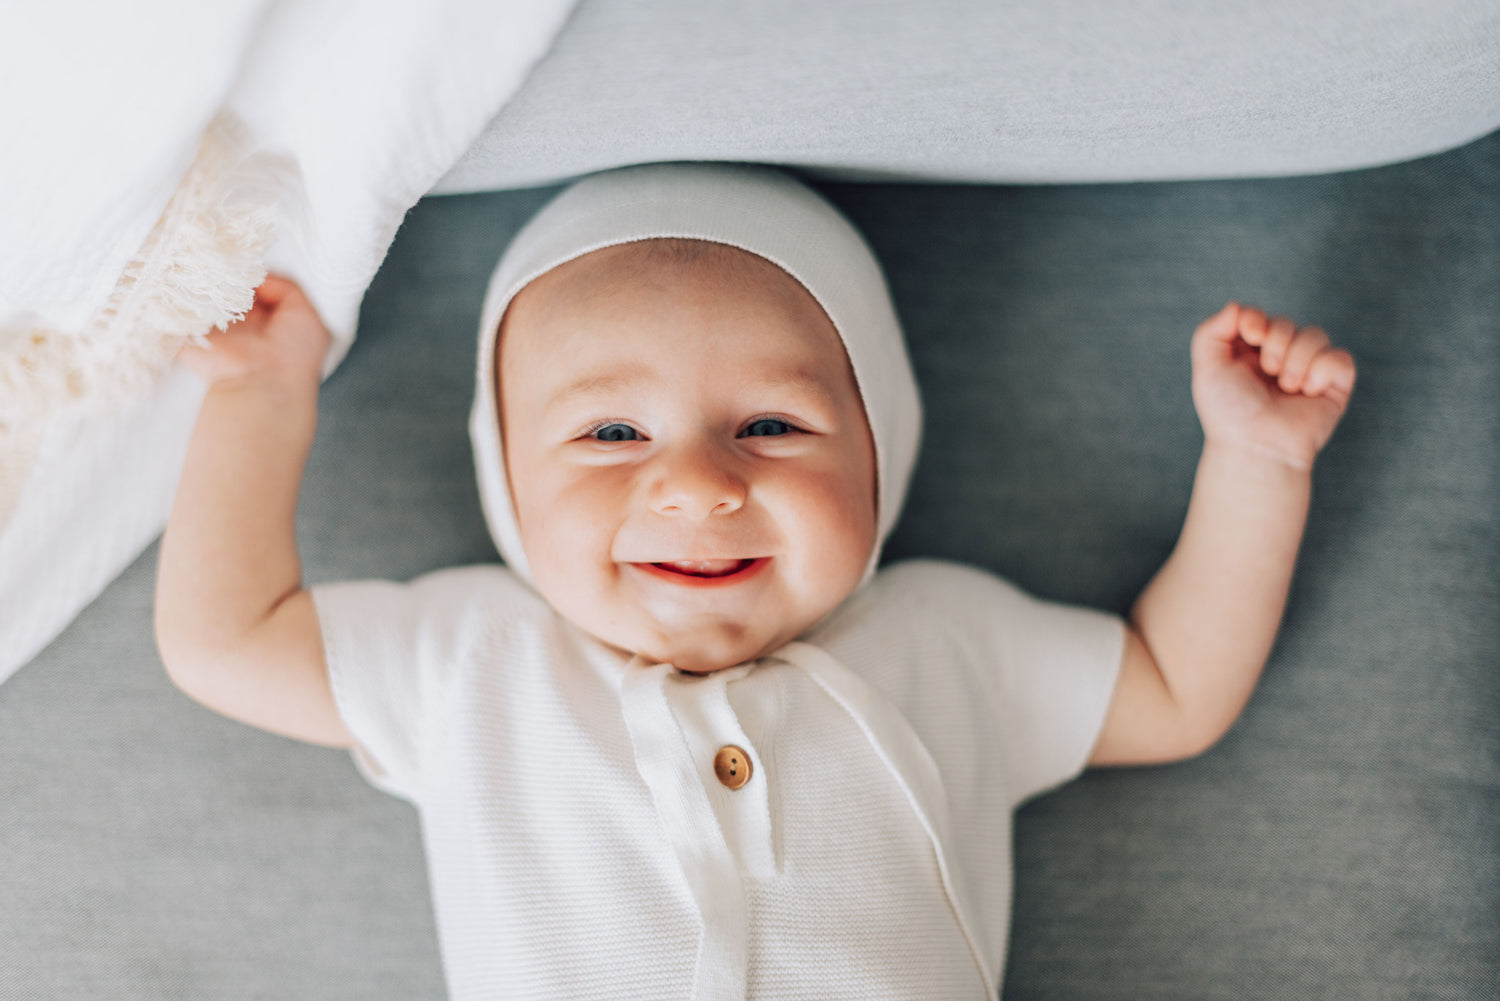 Smiling baby boy in white blessing outfit with white bonnet next to white blanket with tassels.